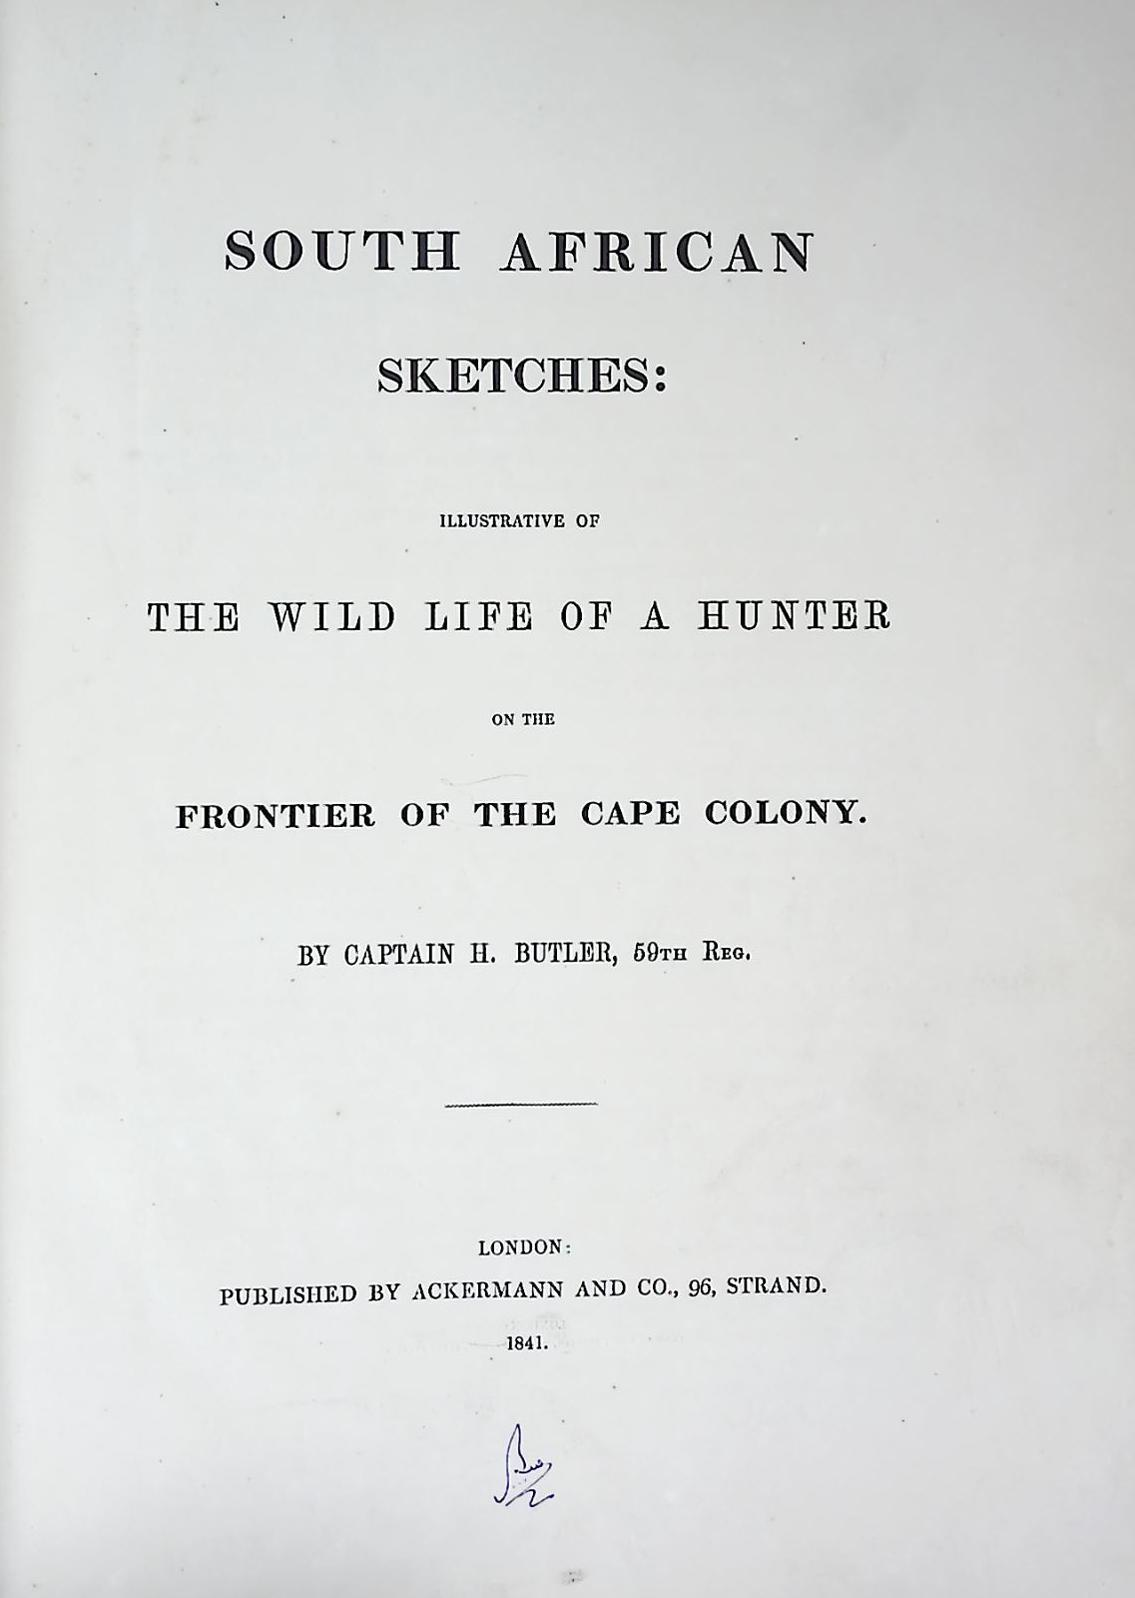 South African Sketches: Illustrative of The Wild Life of a Hunter on the Frontier of the Cape Colony.